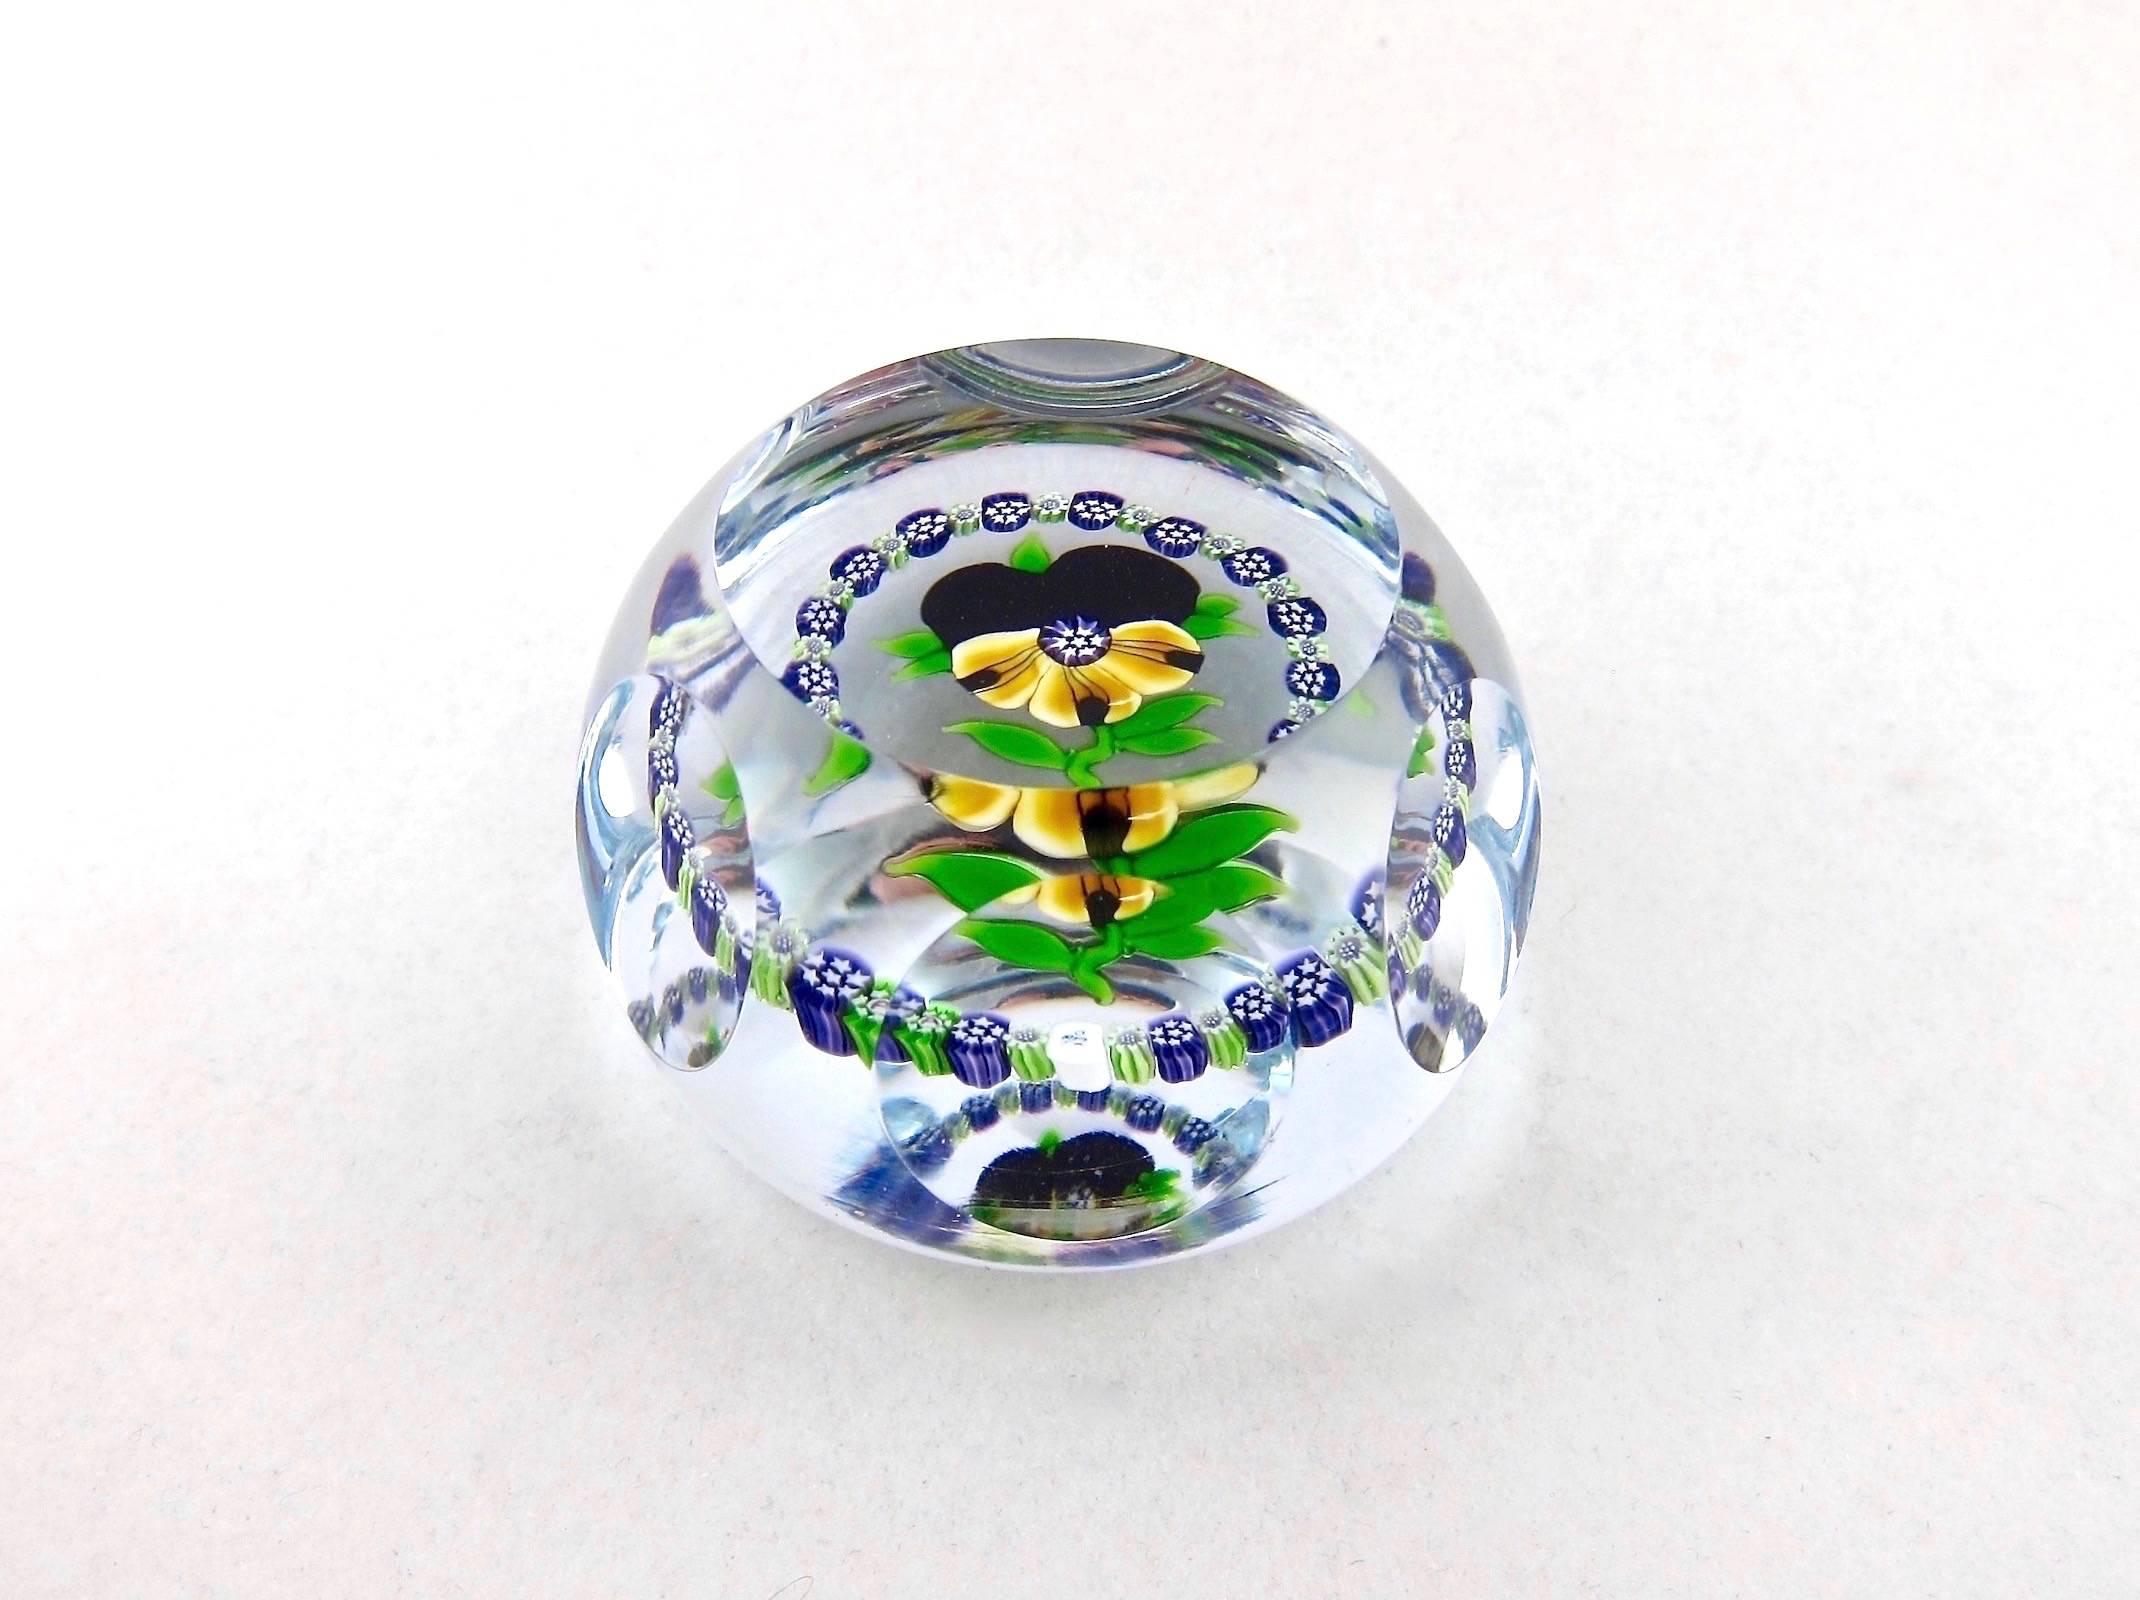 Scottish Limited Edition Faceted Pansy Paperweight with Millefiori Garland, J Glass, 1980